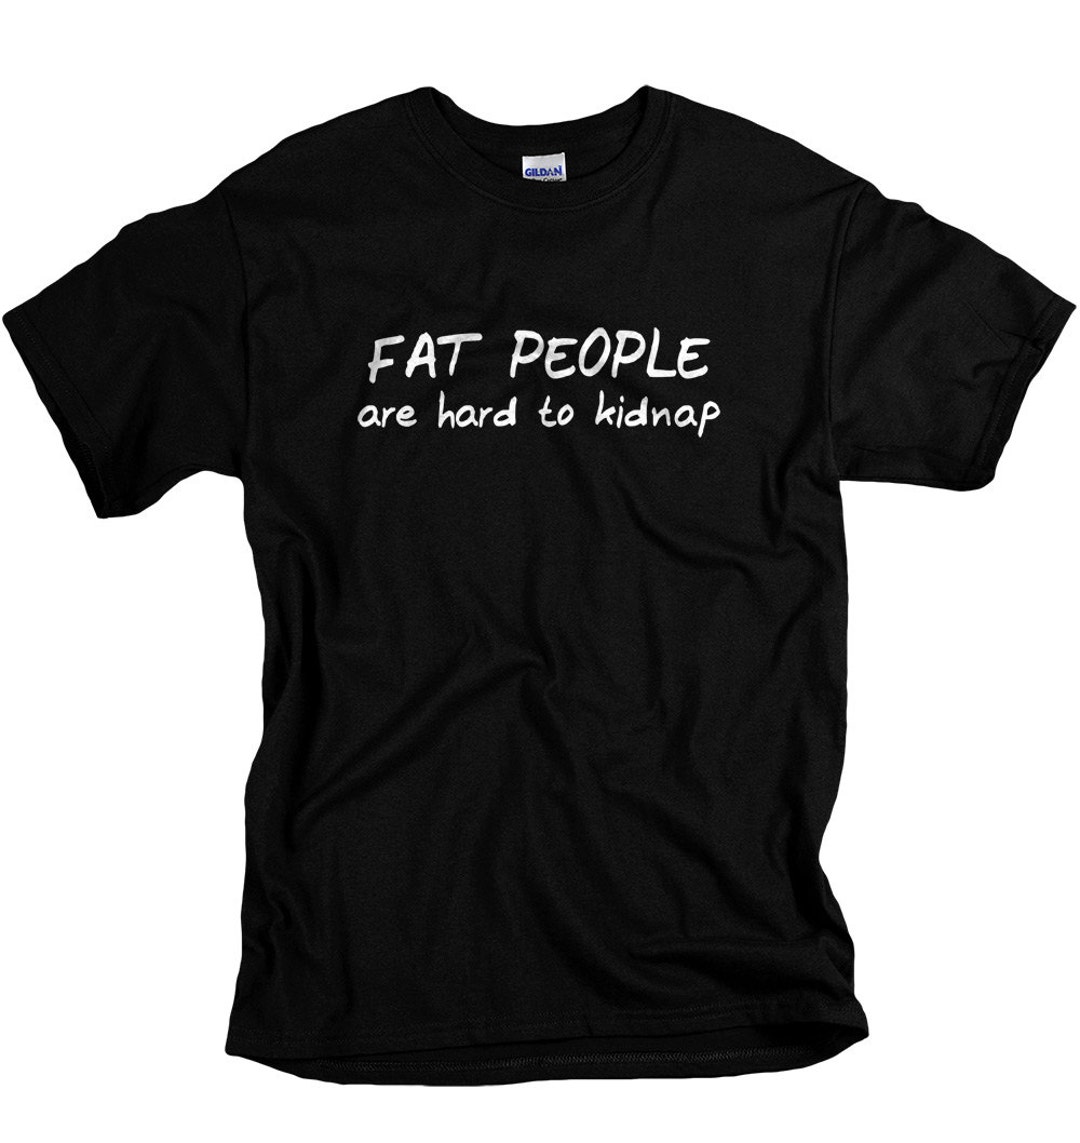 Funny Shirts for Men Fat People Are Hard to Kidnap Funny T-shirt ...